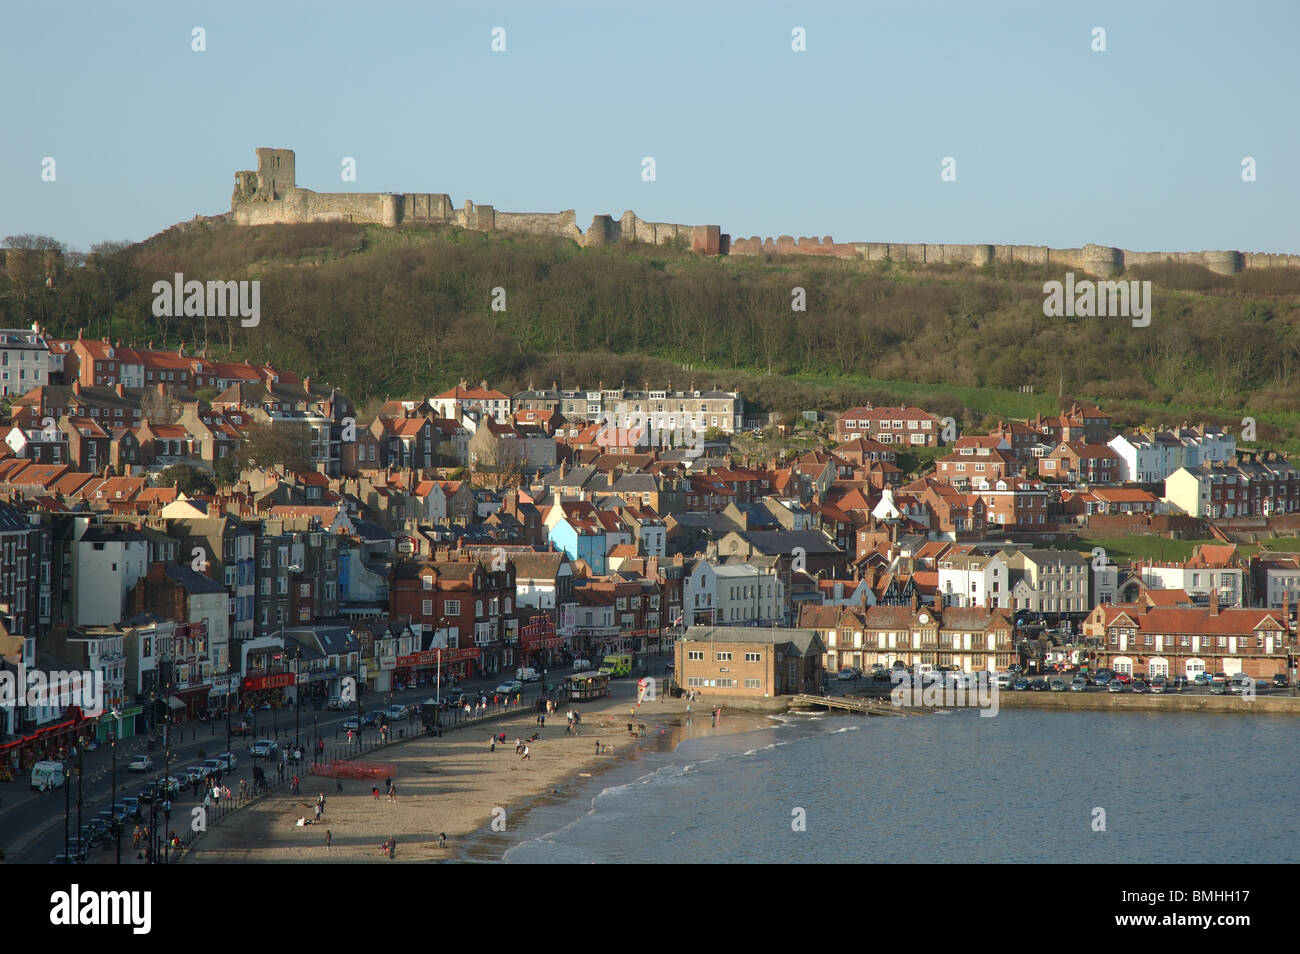 Castle and South Bay, Scarborough, North Yorkshire, England, UK Stock Photo